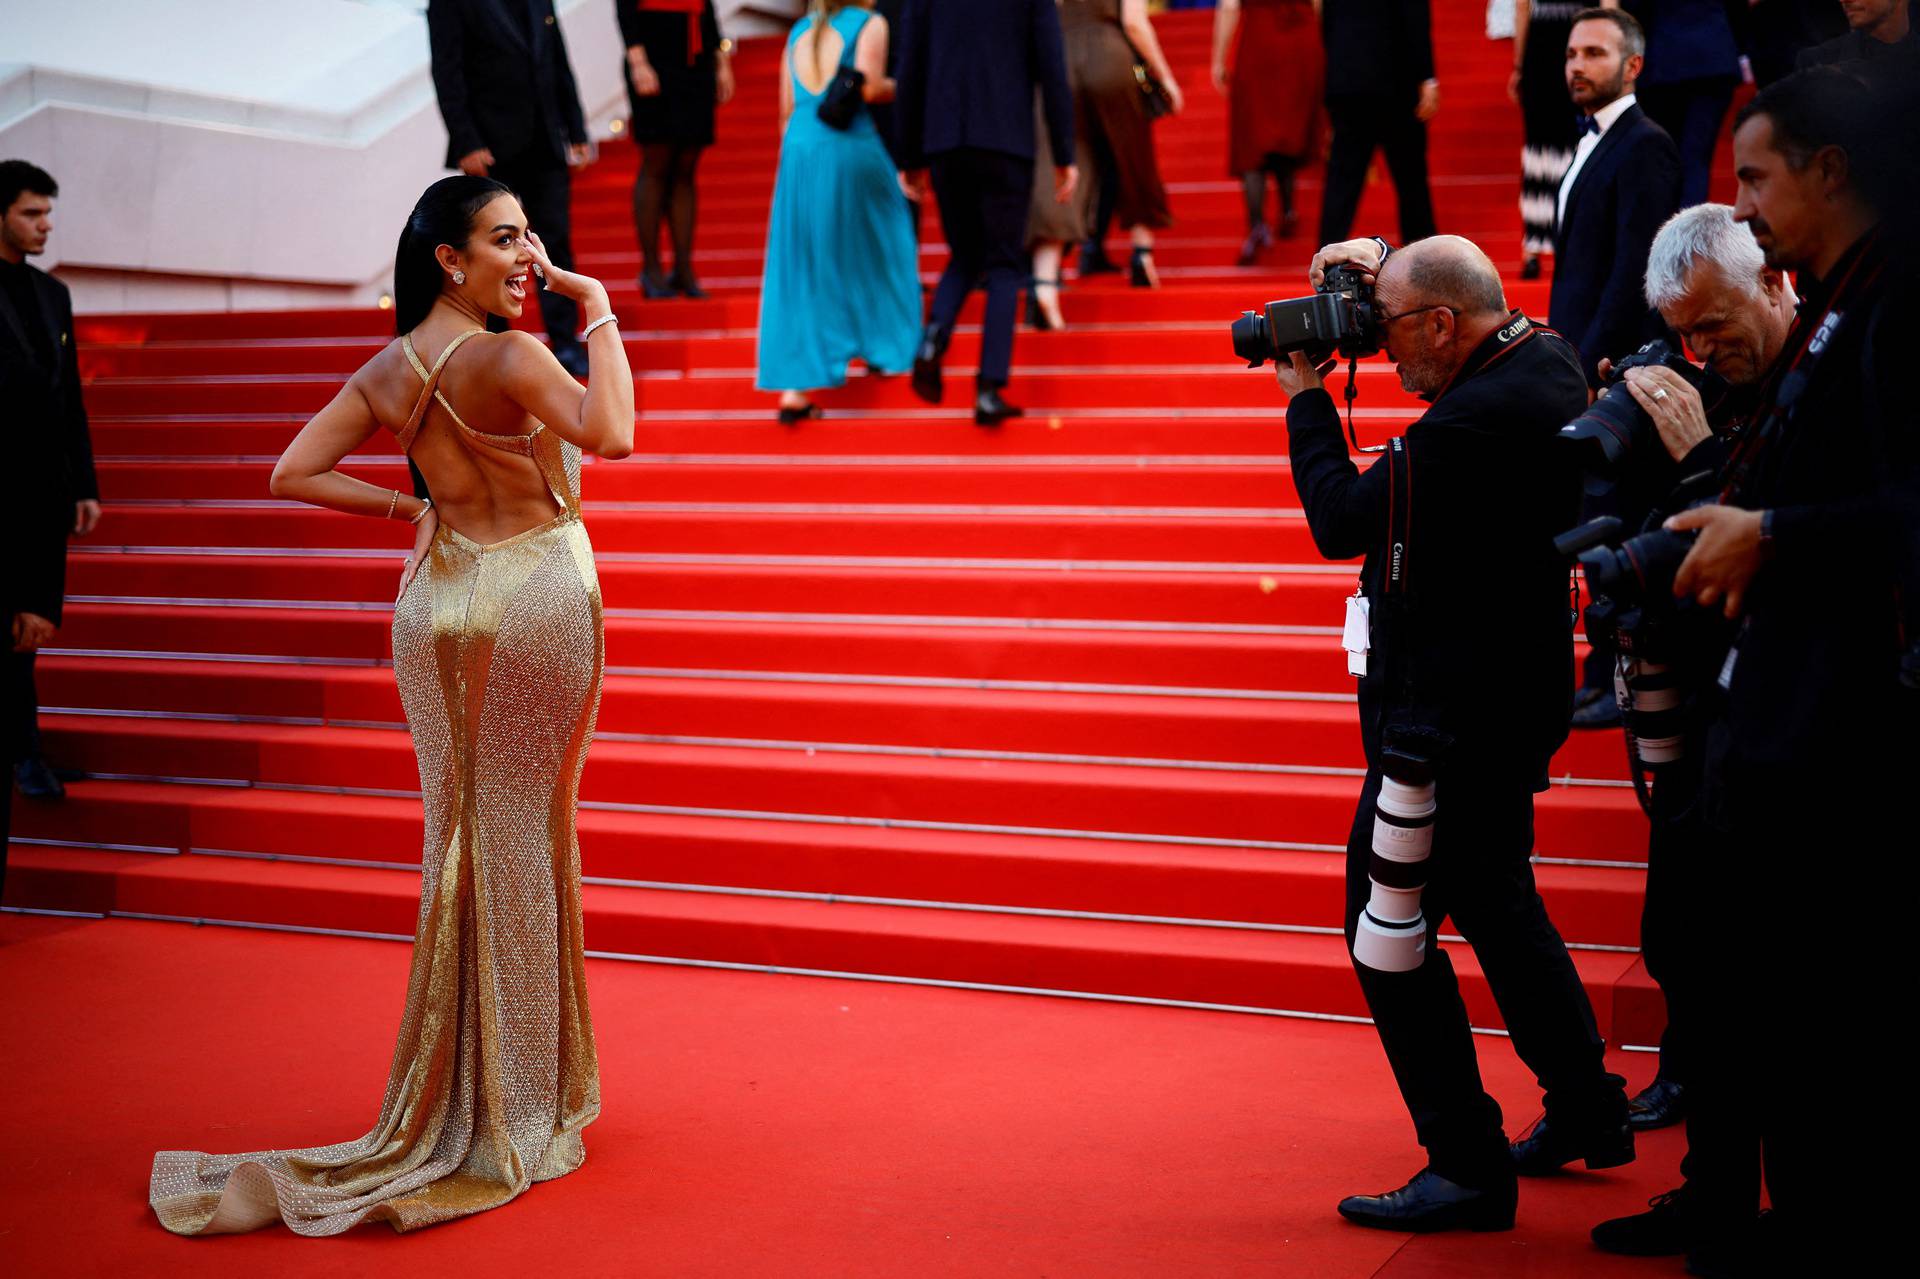 The 76th Cannes Film Festival - Screening of the film "L'ete dernier" in competition - Red Carpet Arrivals